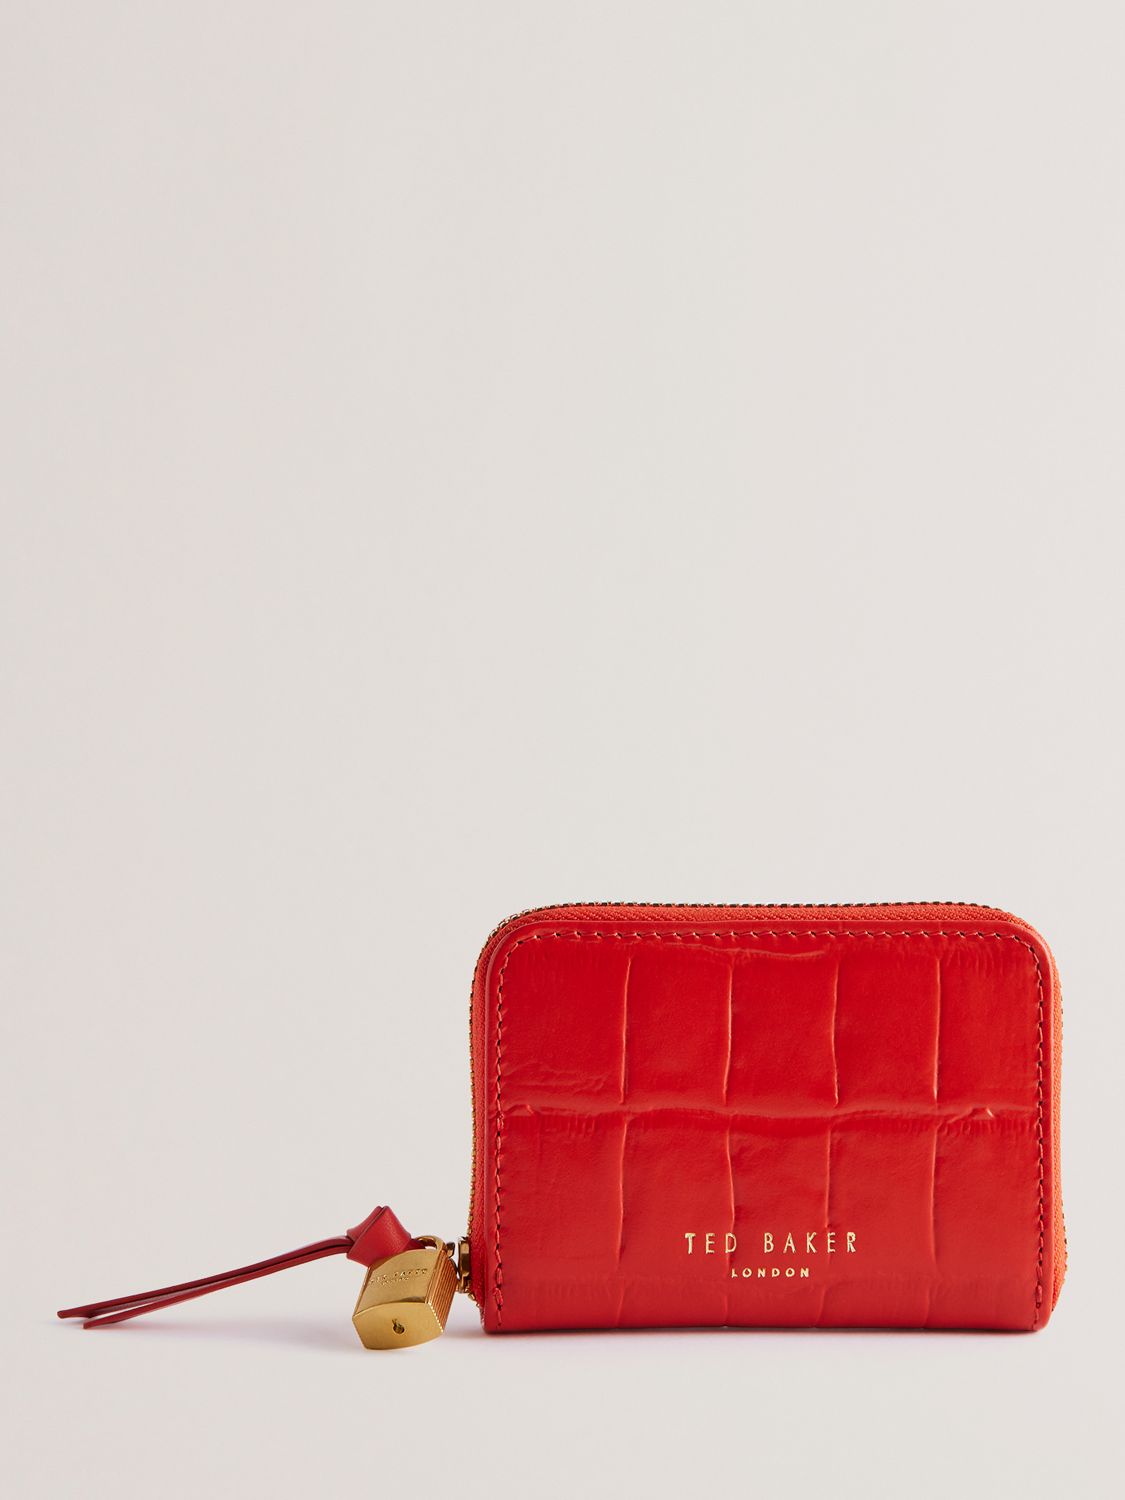 Ted Baker Wesmin Small Croc Effect Leather Purse, Red, One Size